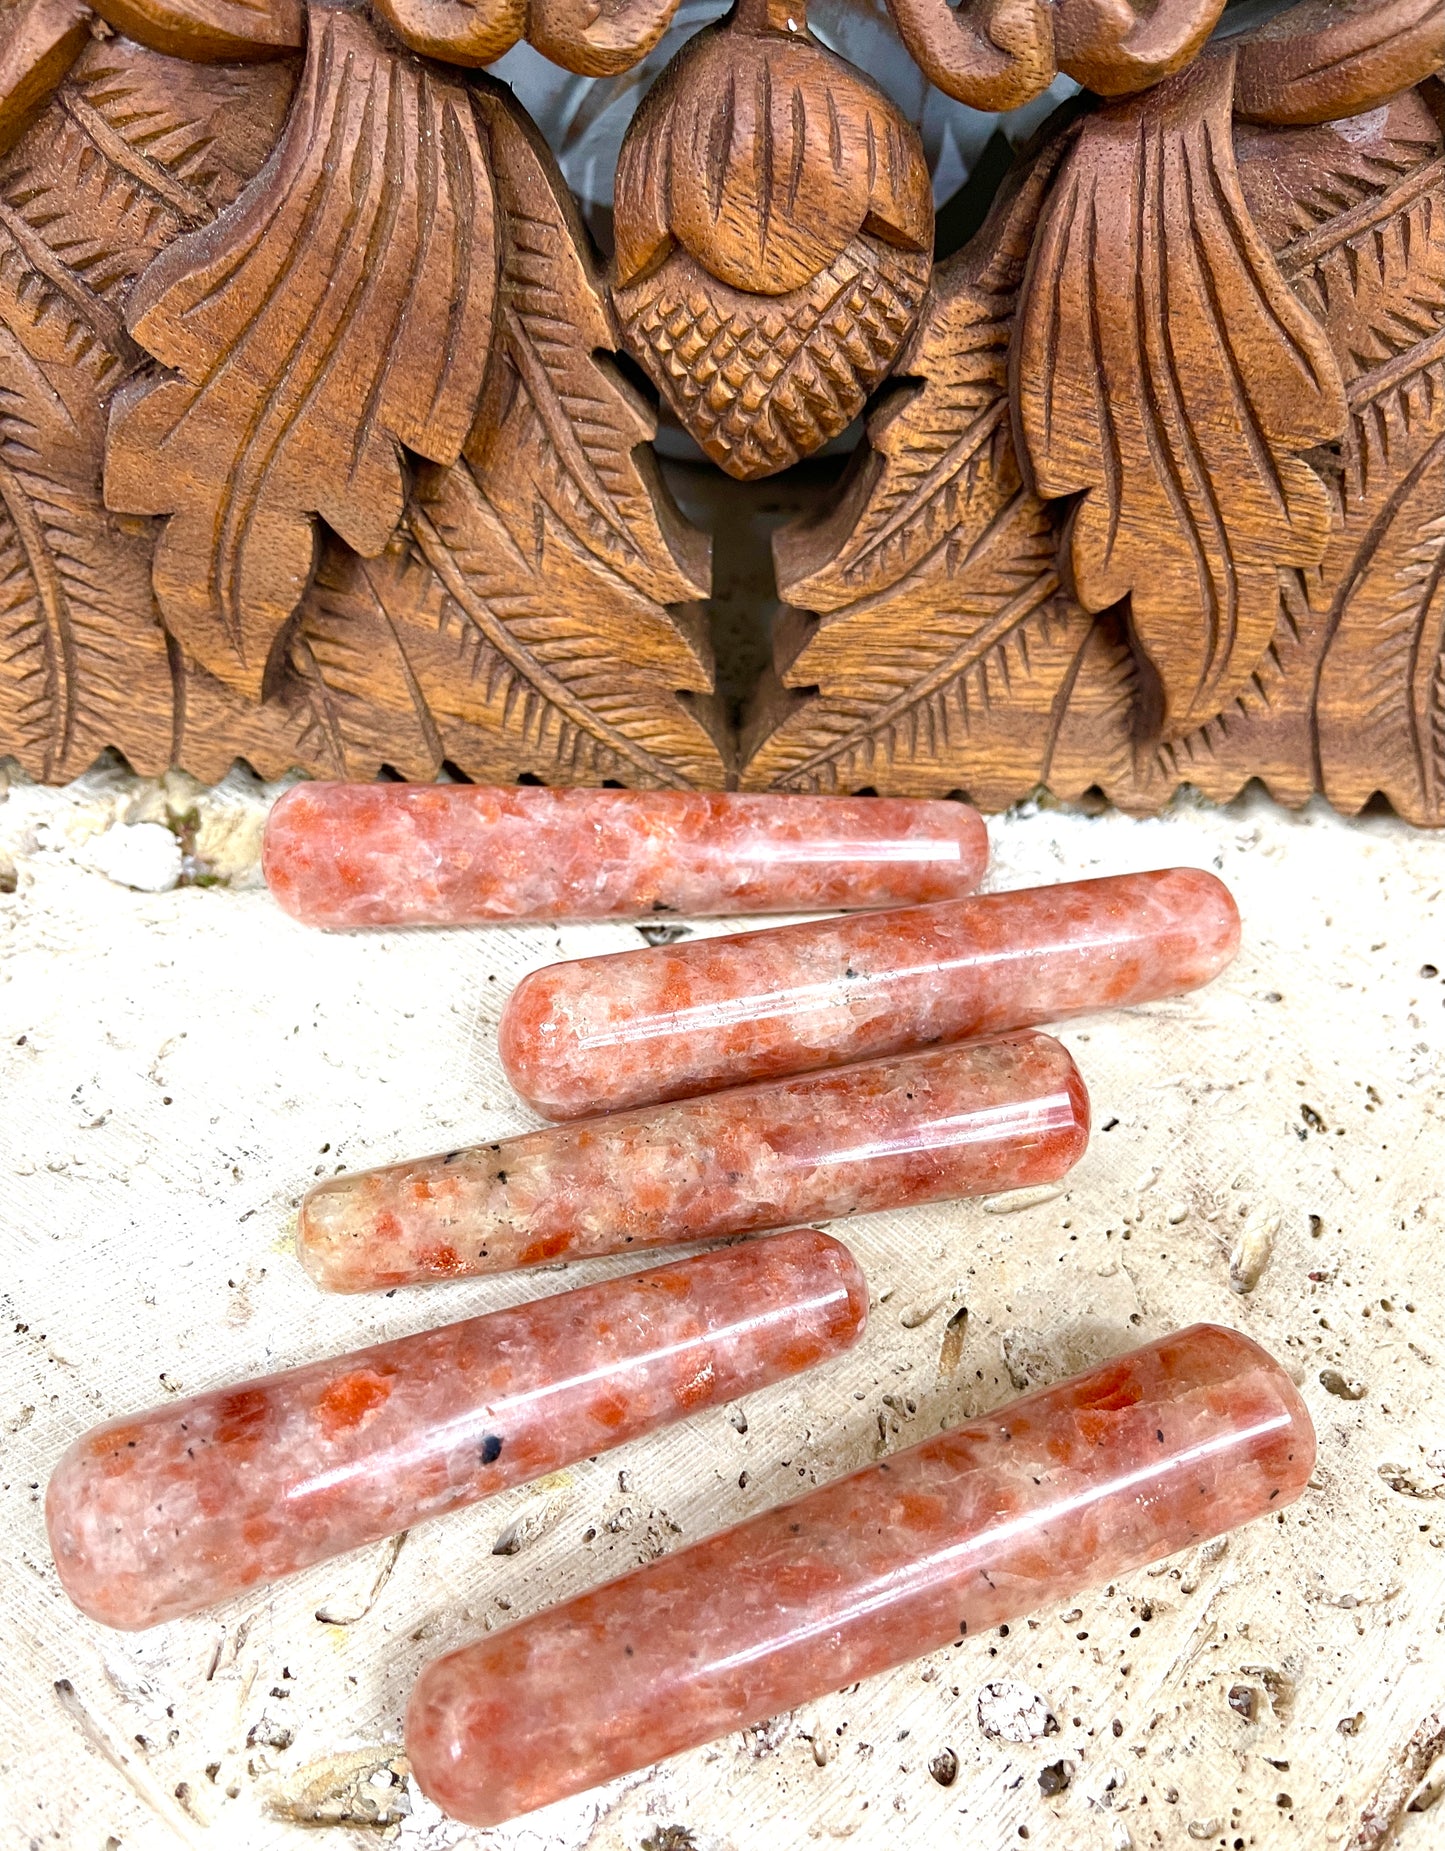 Sunstone Massage wands from India